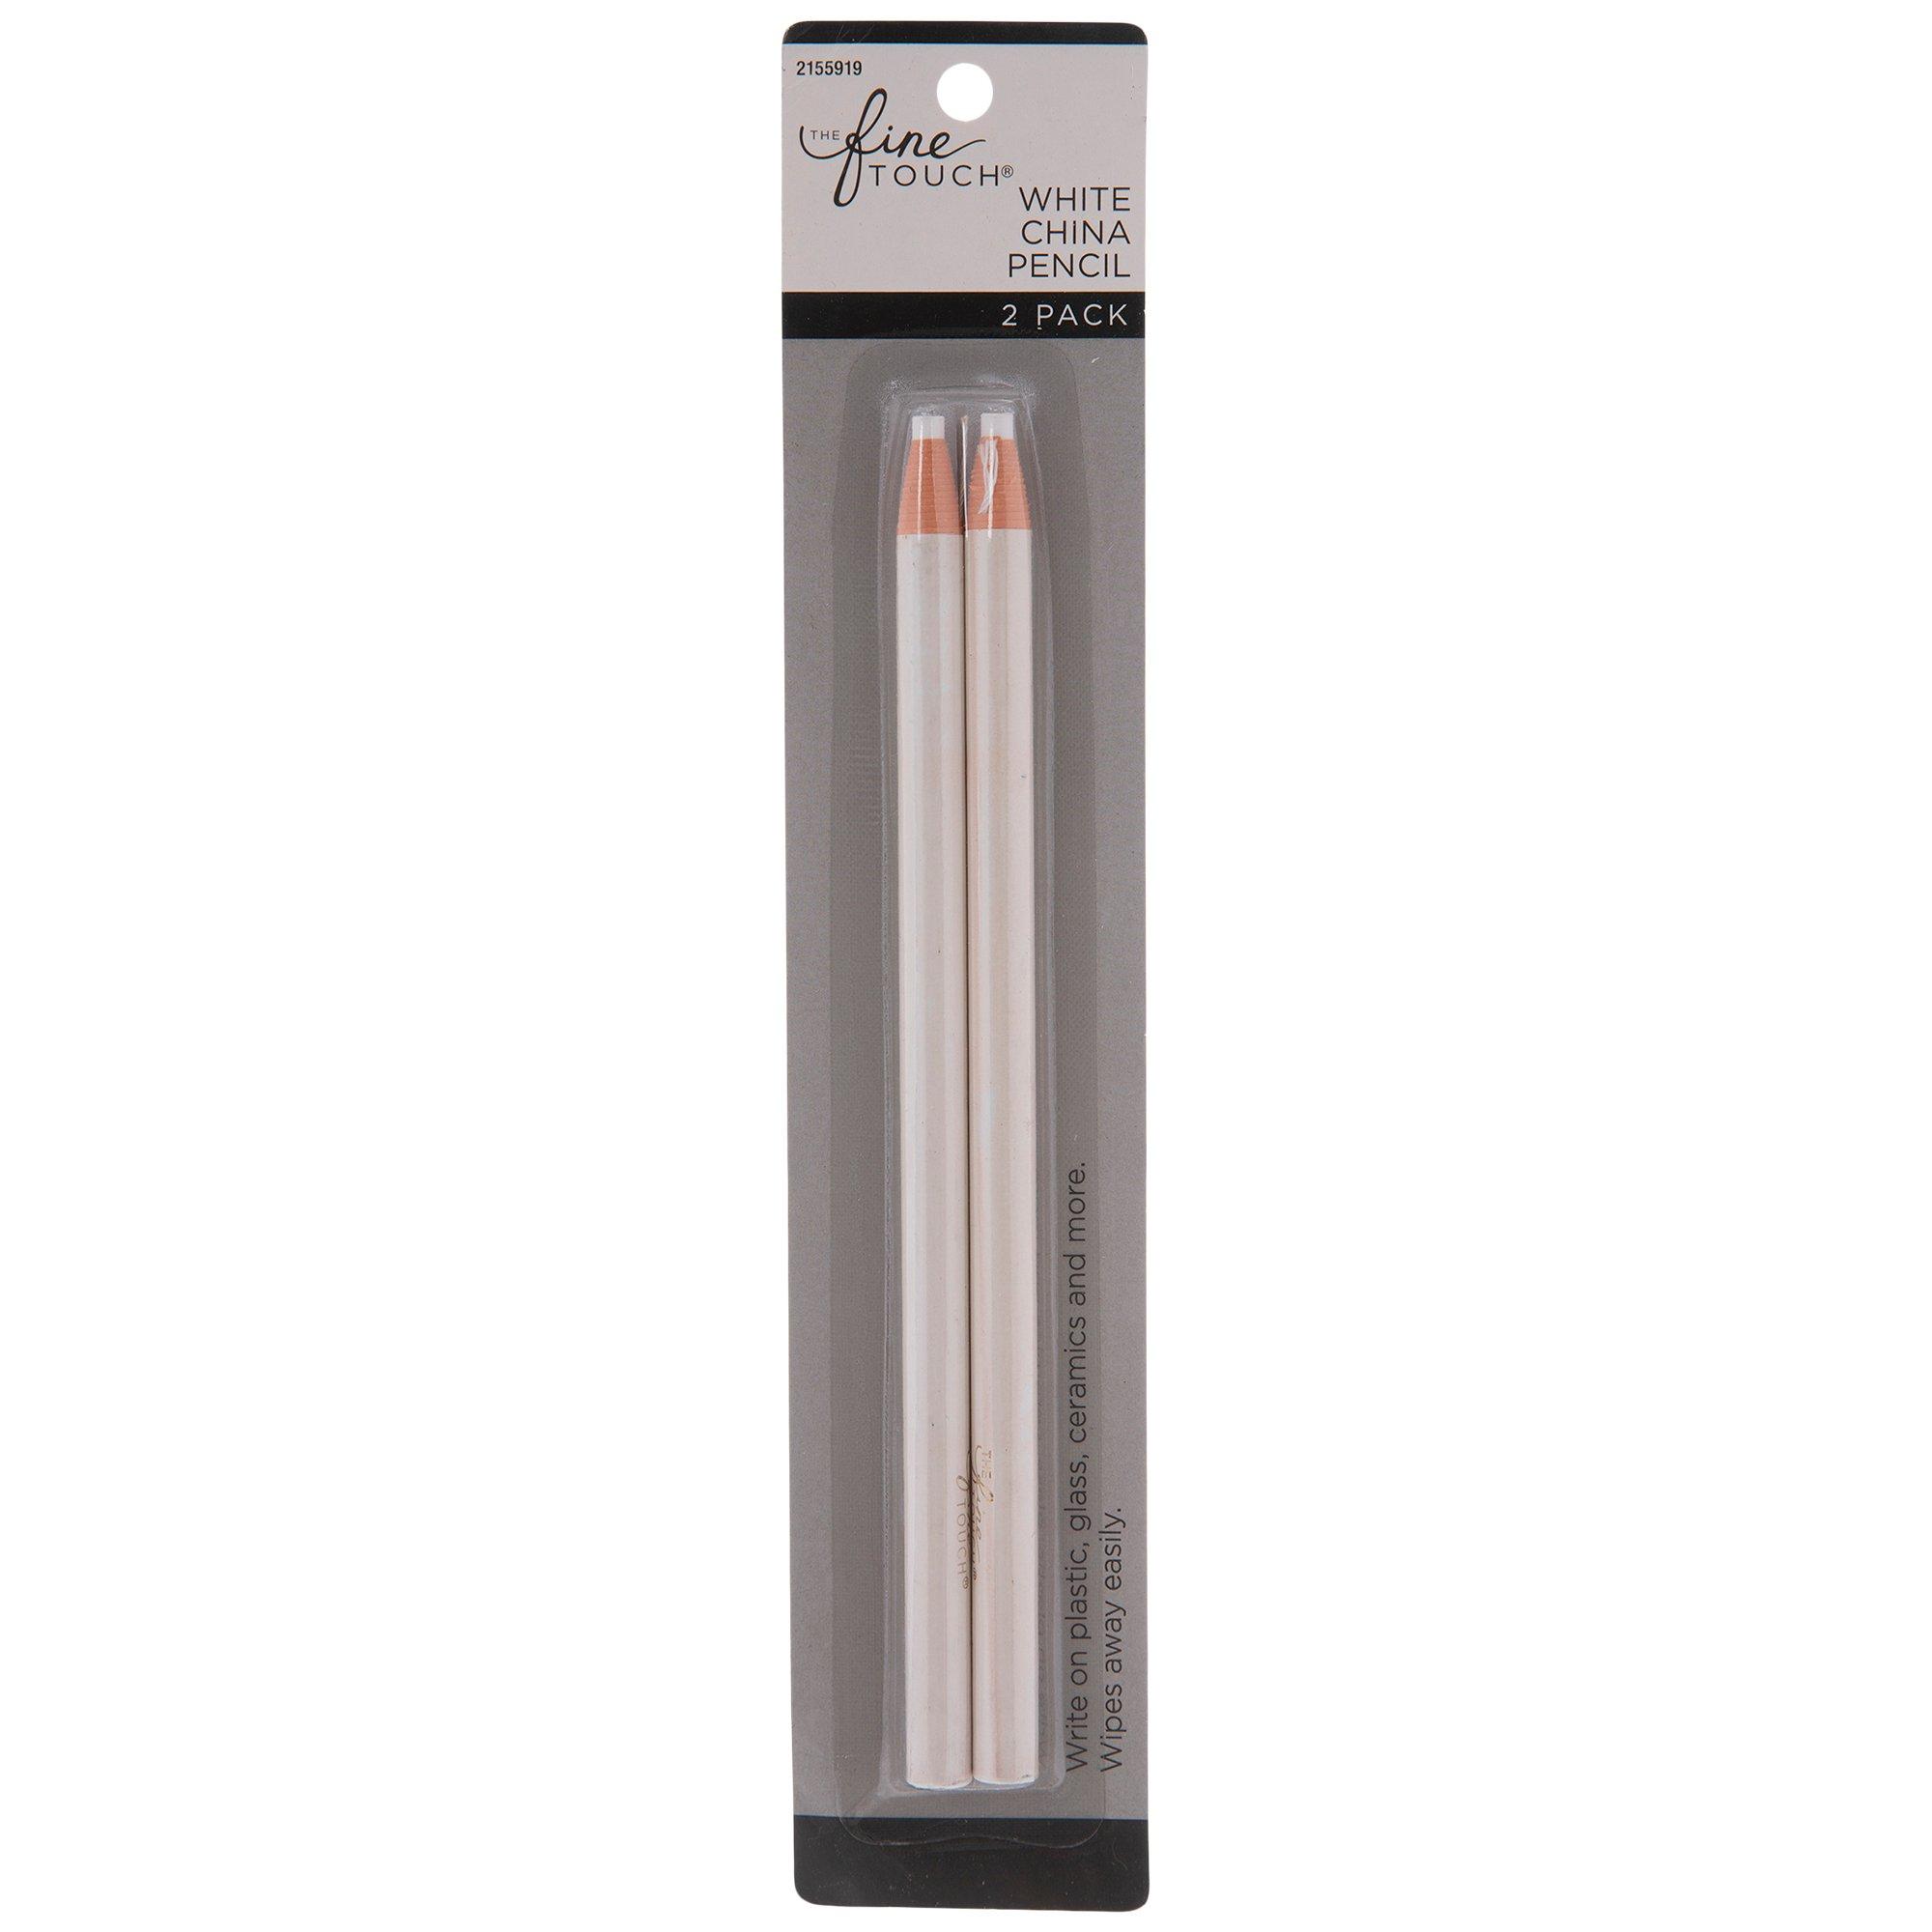 White The Fine Touch China Pencils - 2 Piece Set